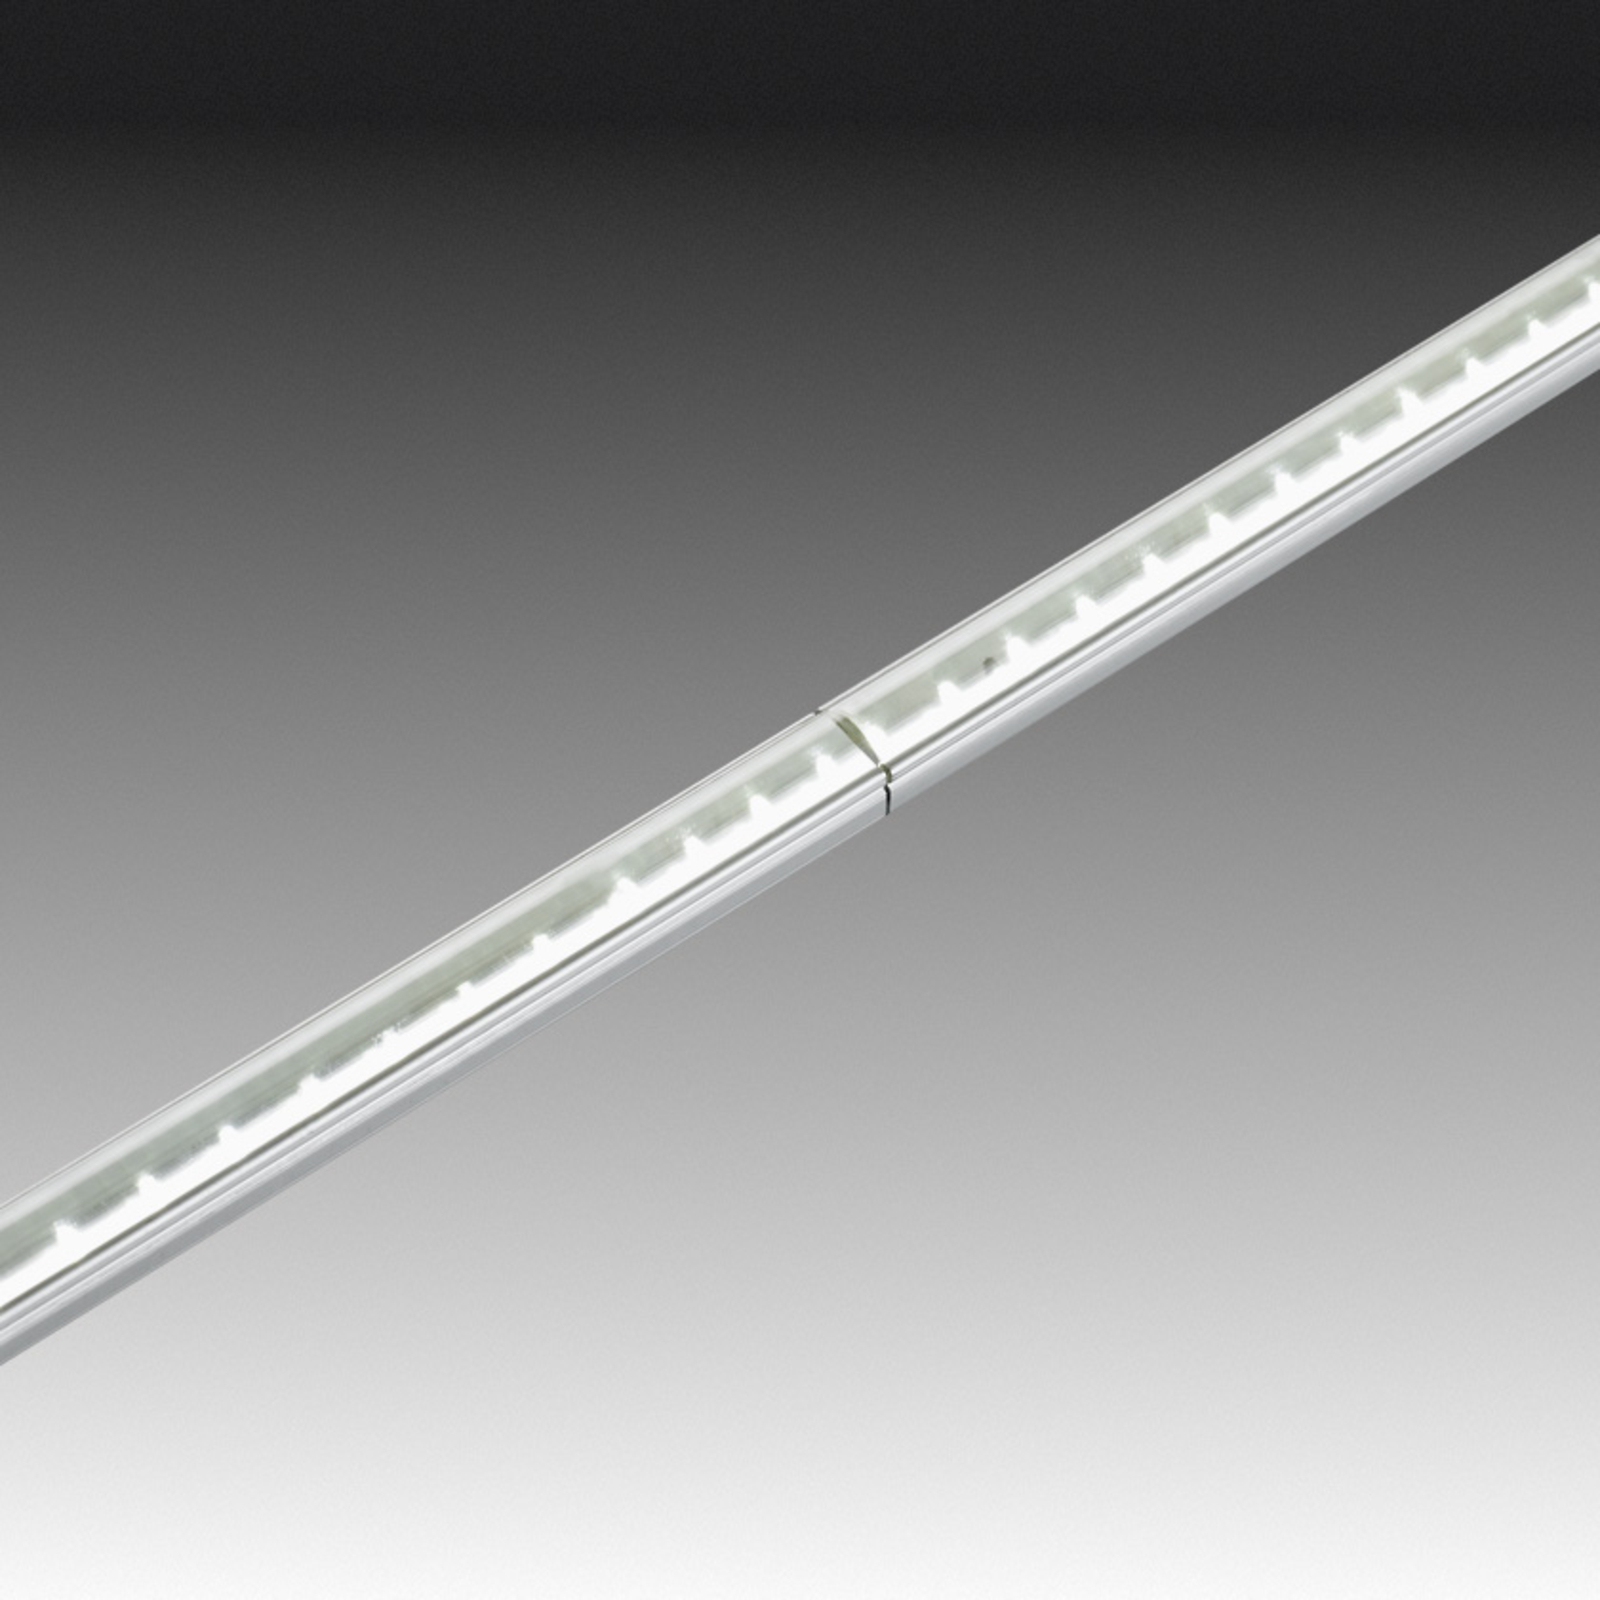 LED staaf LED Stick 2 voor meubels, 7cm, warmwit